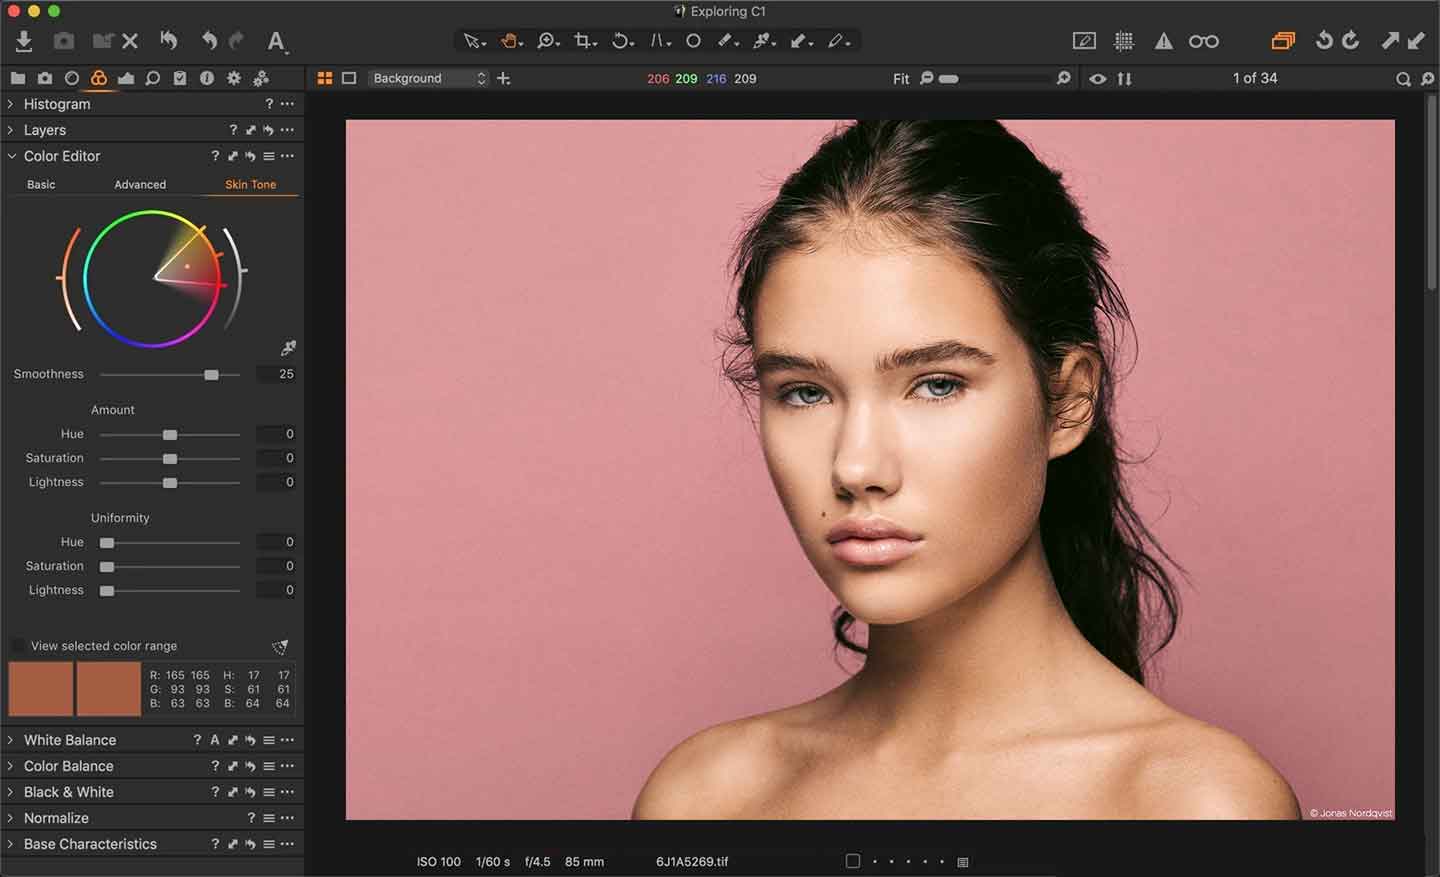 download the new version for apple Capture One 23 Pro 16.2.2.1406